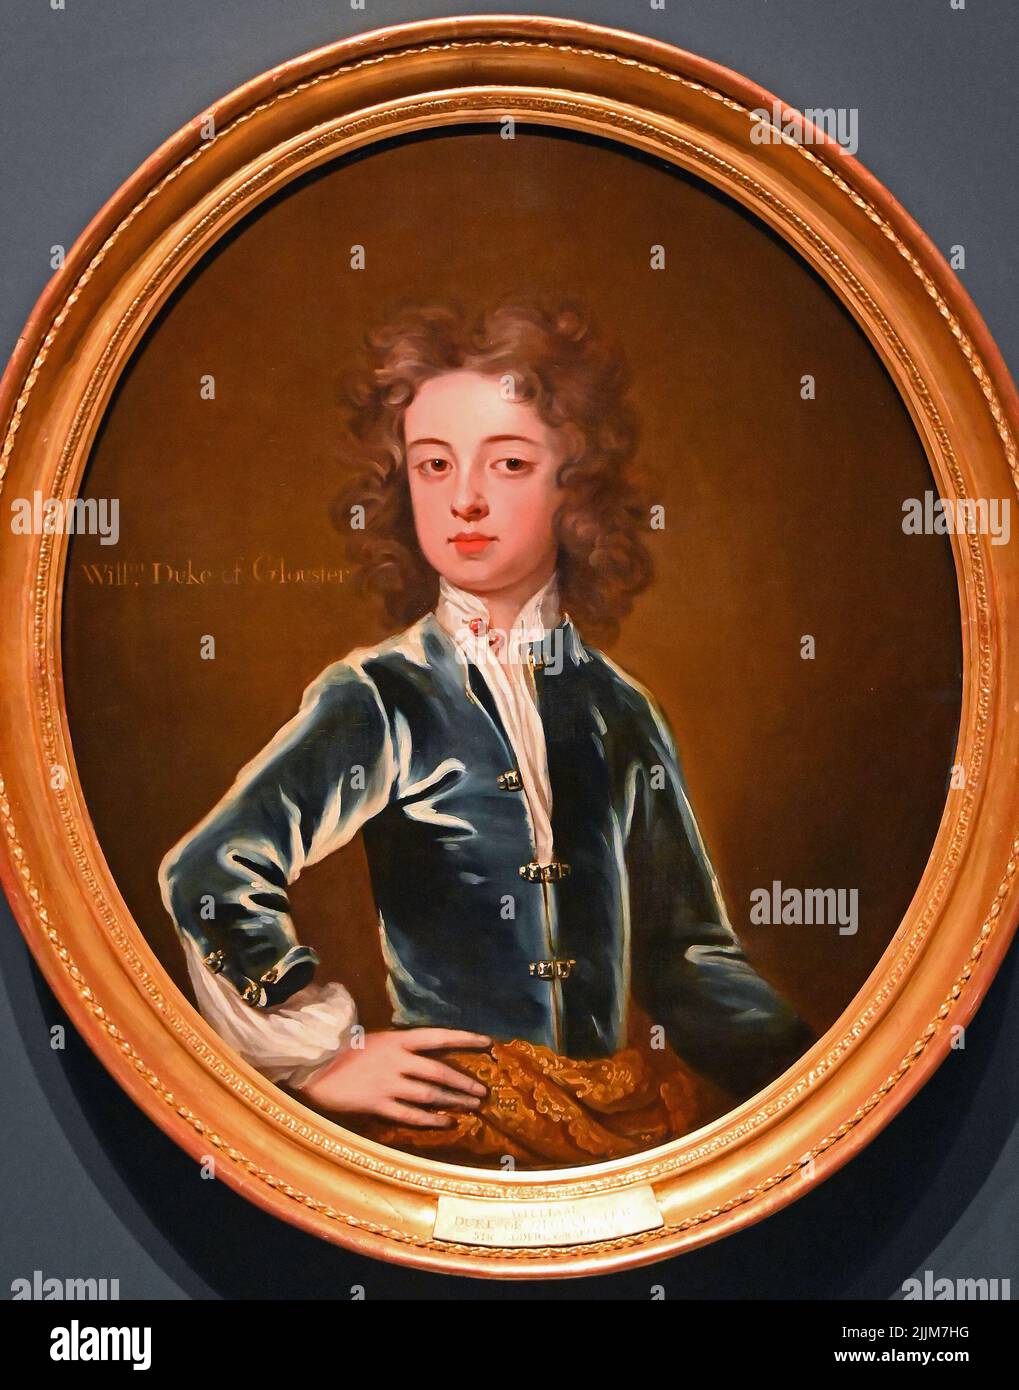 William, Duke of Gloucester. c1695. Attributed to Charles d'Agar. Oil on canvas. Stock Photo